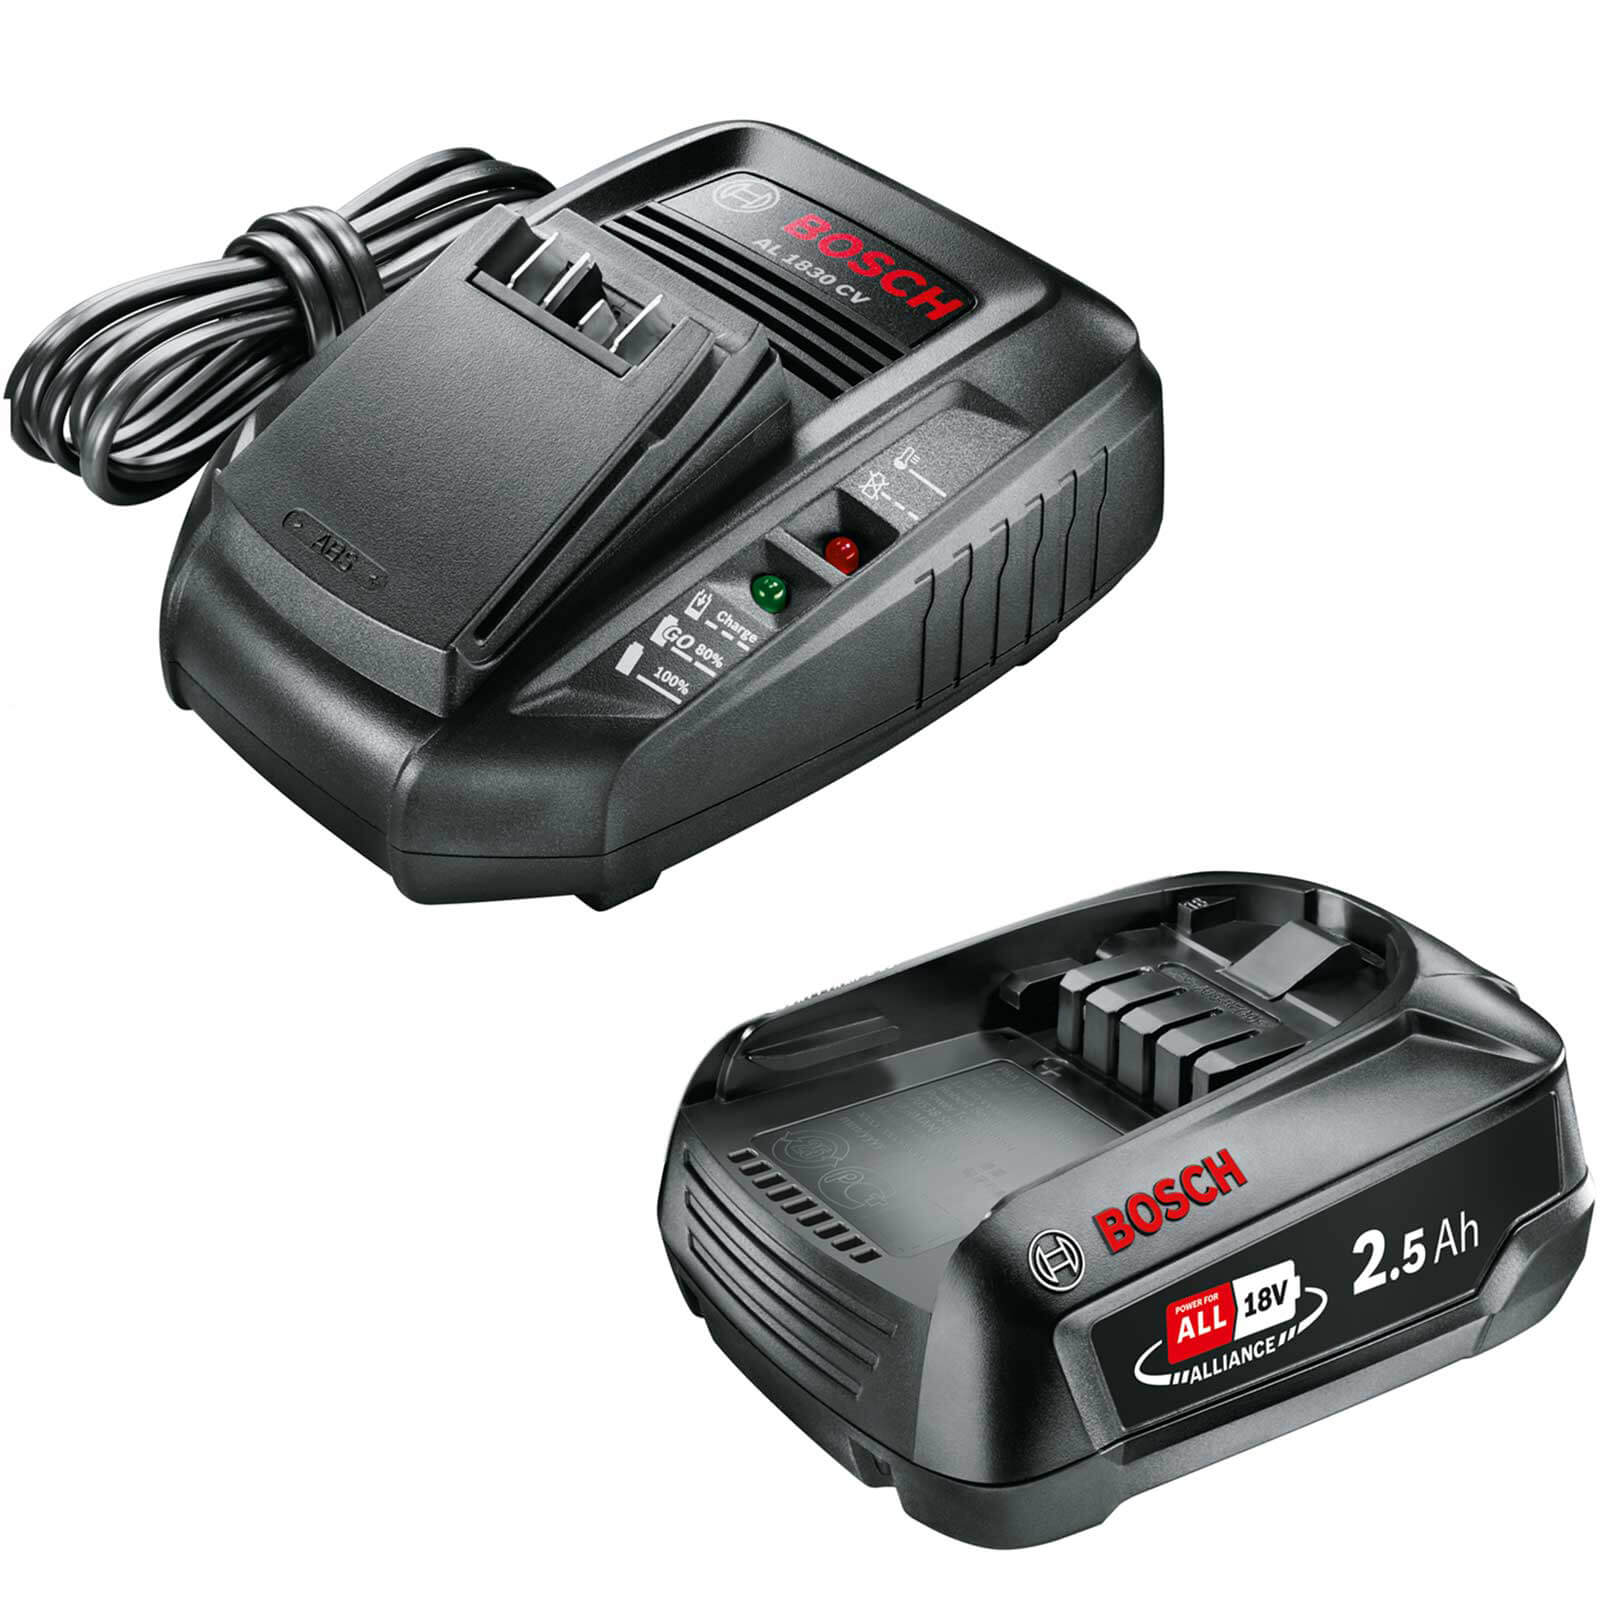 Image of Bosch Genuine GREEN 18v Cordless Li-ion Battery 2.5ah and 3A Fast Charger 2.5ah